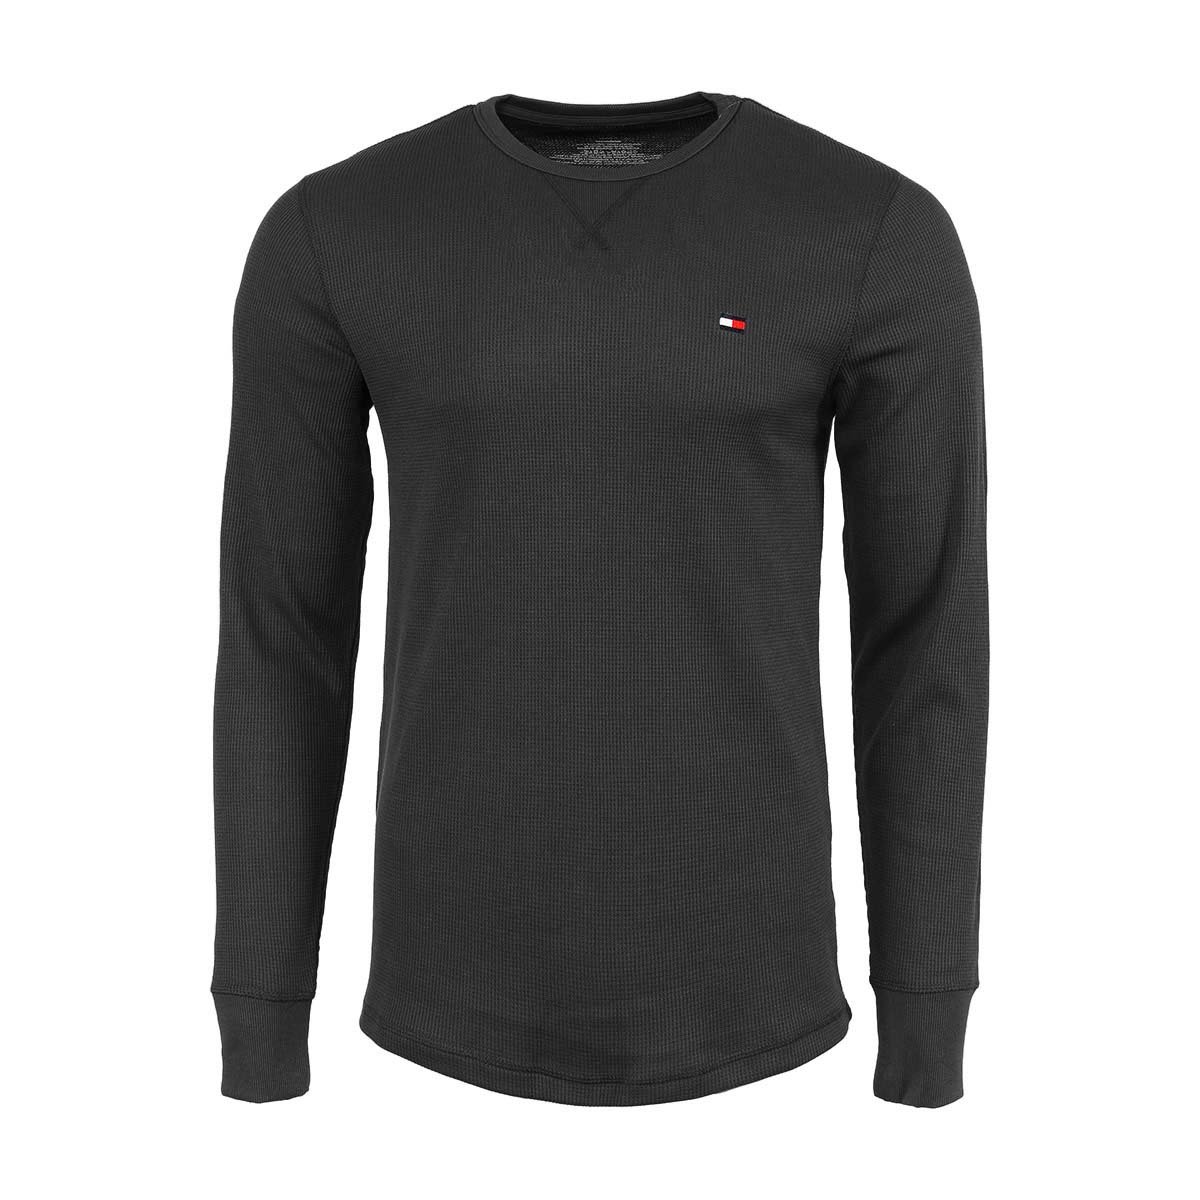 Image of Tommy Hilfiger Men's Thermal Long Sleeve Shirt